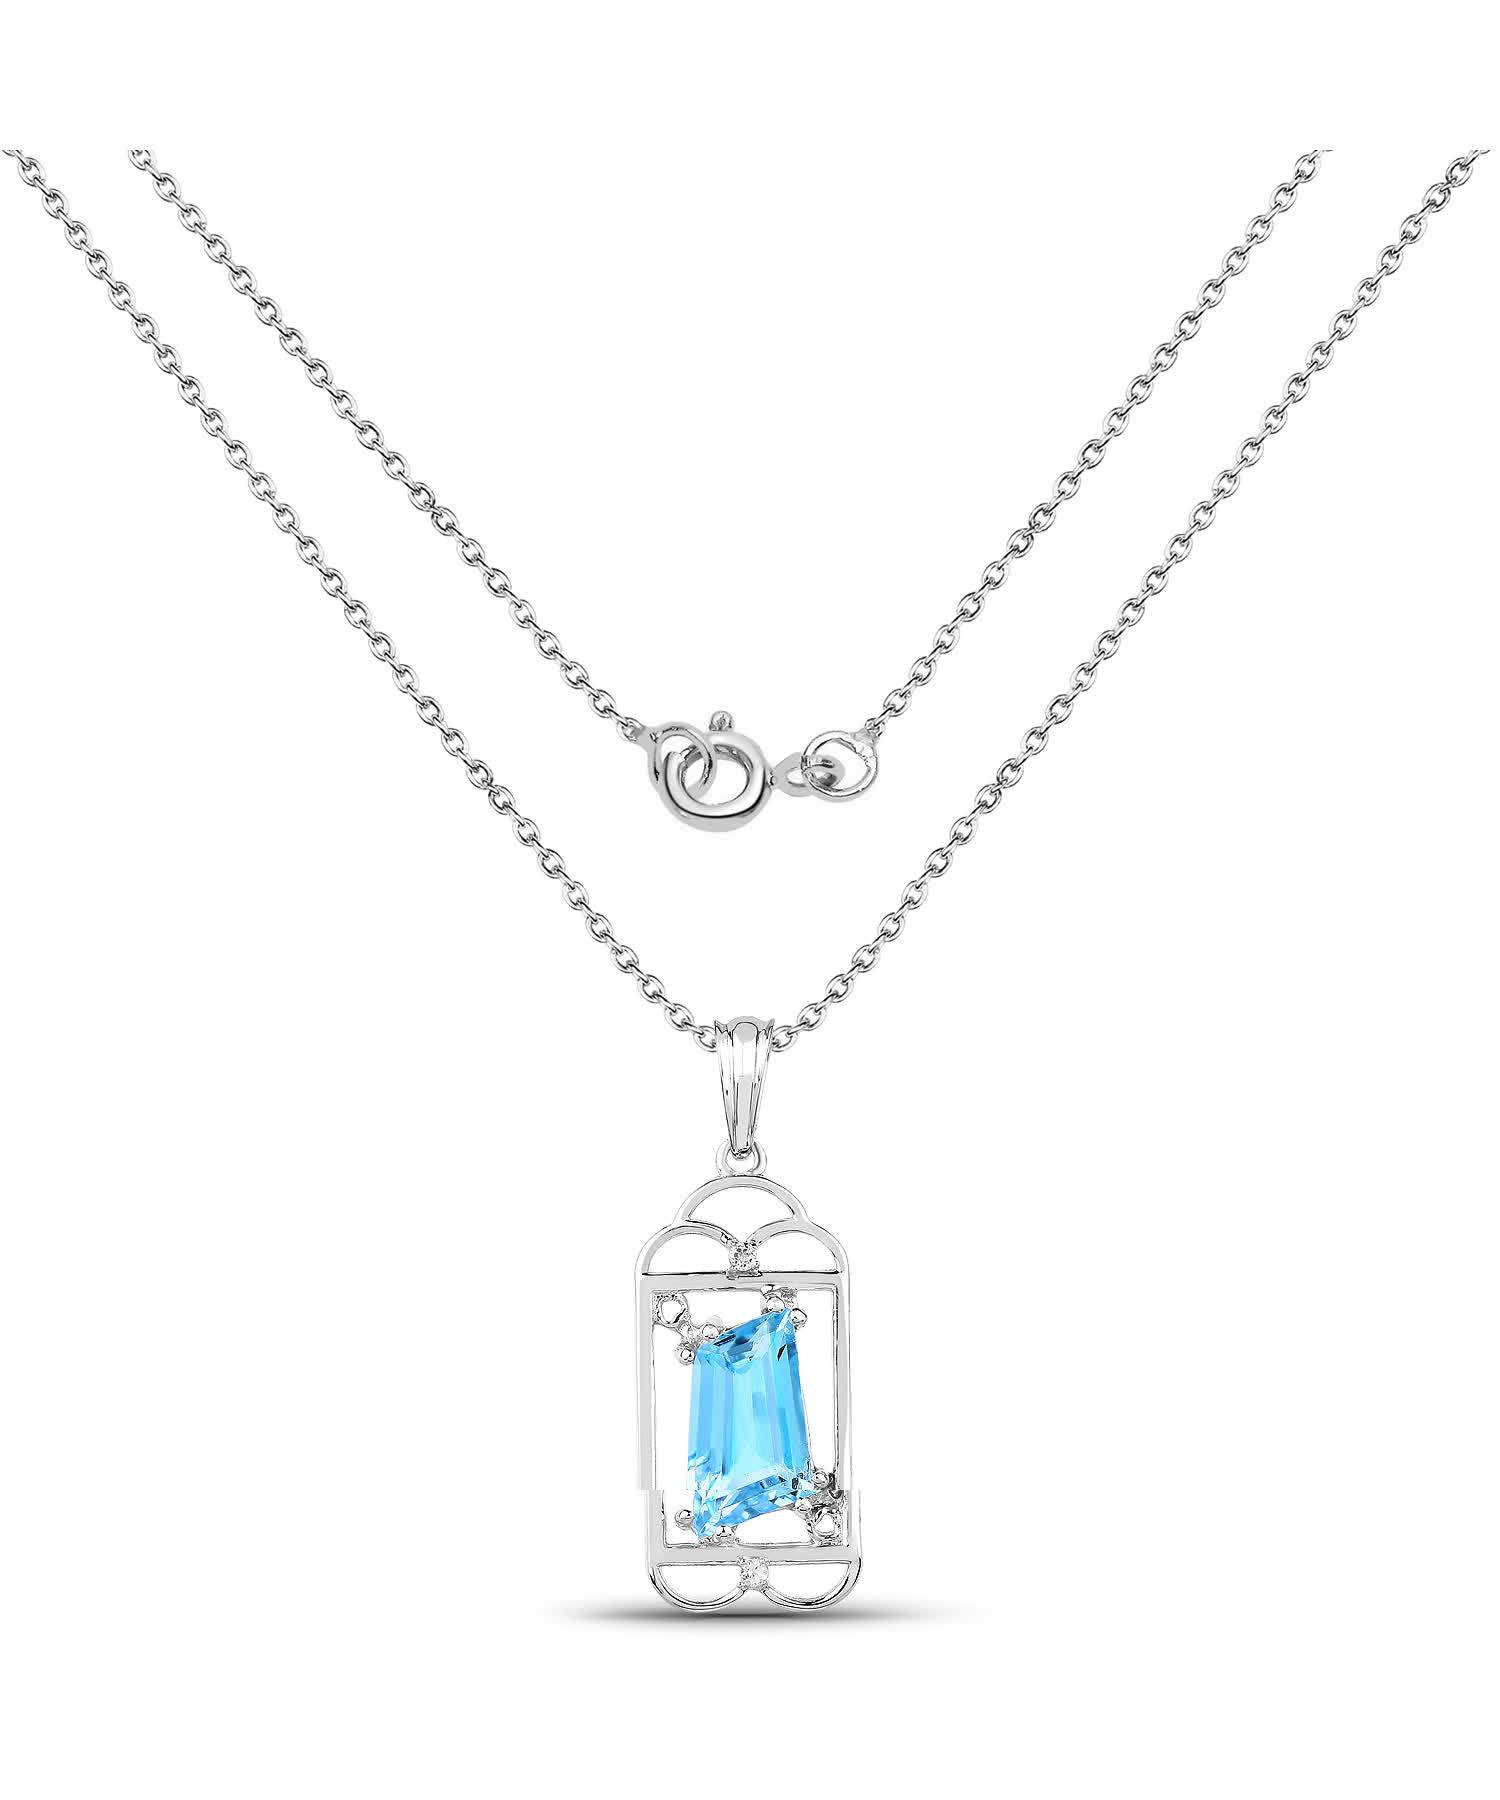 4.57ctw Natural Swiss Blue Topaz Rhodium Plated 925 Sterling Silver Pendant With Chain View 2